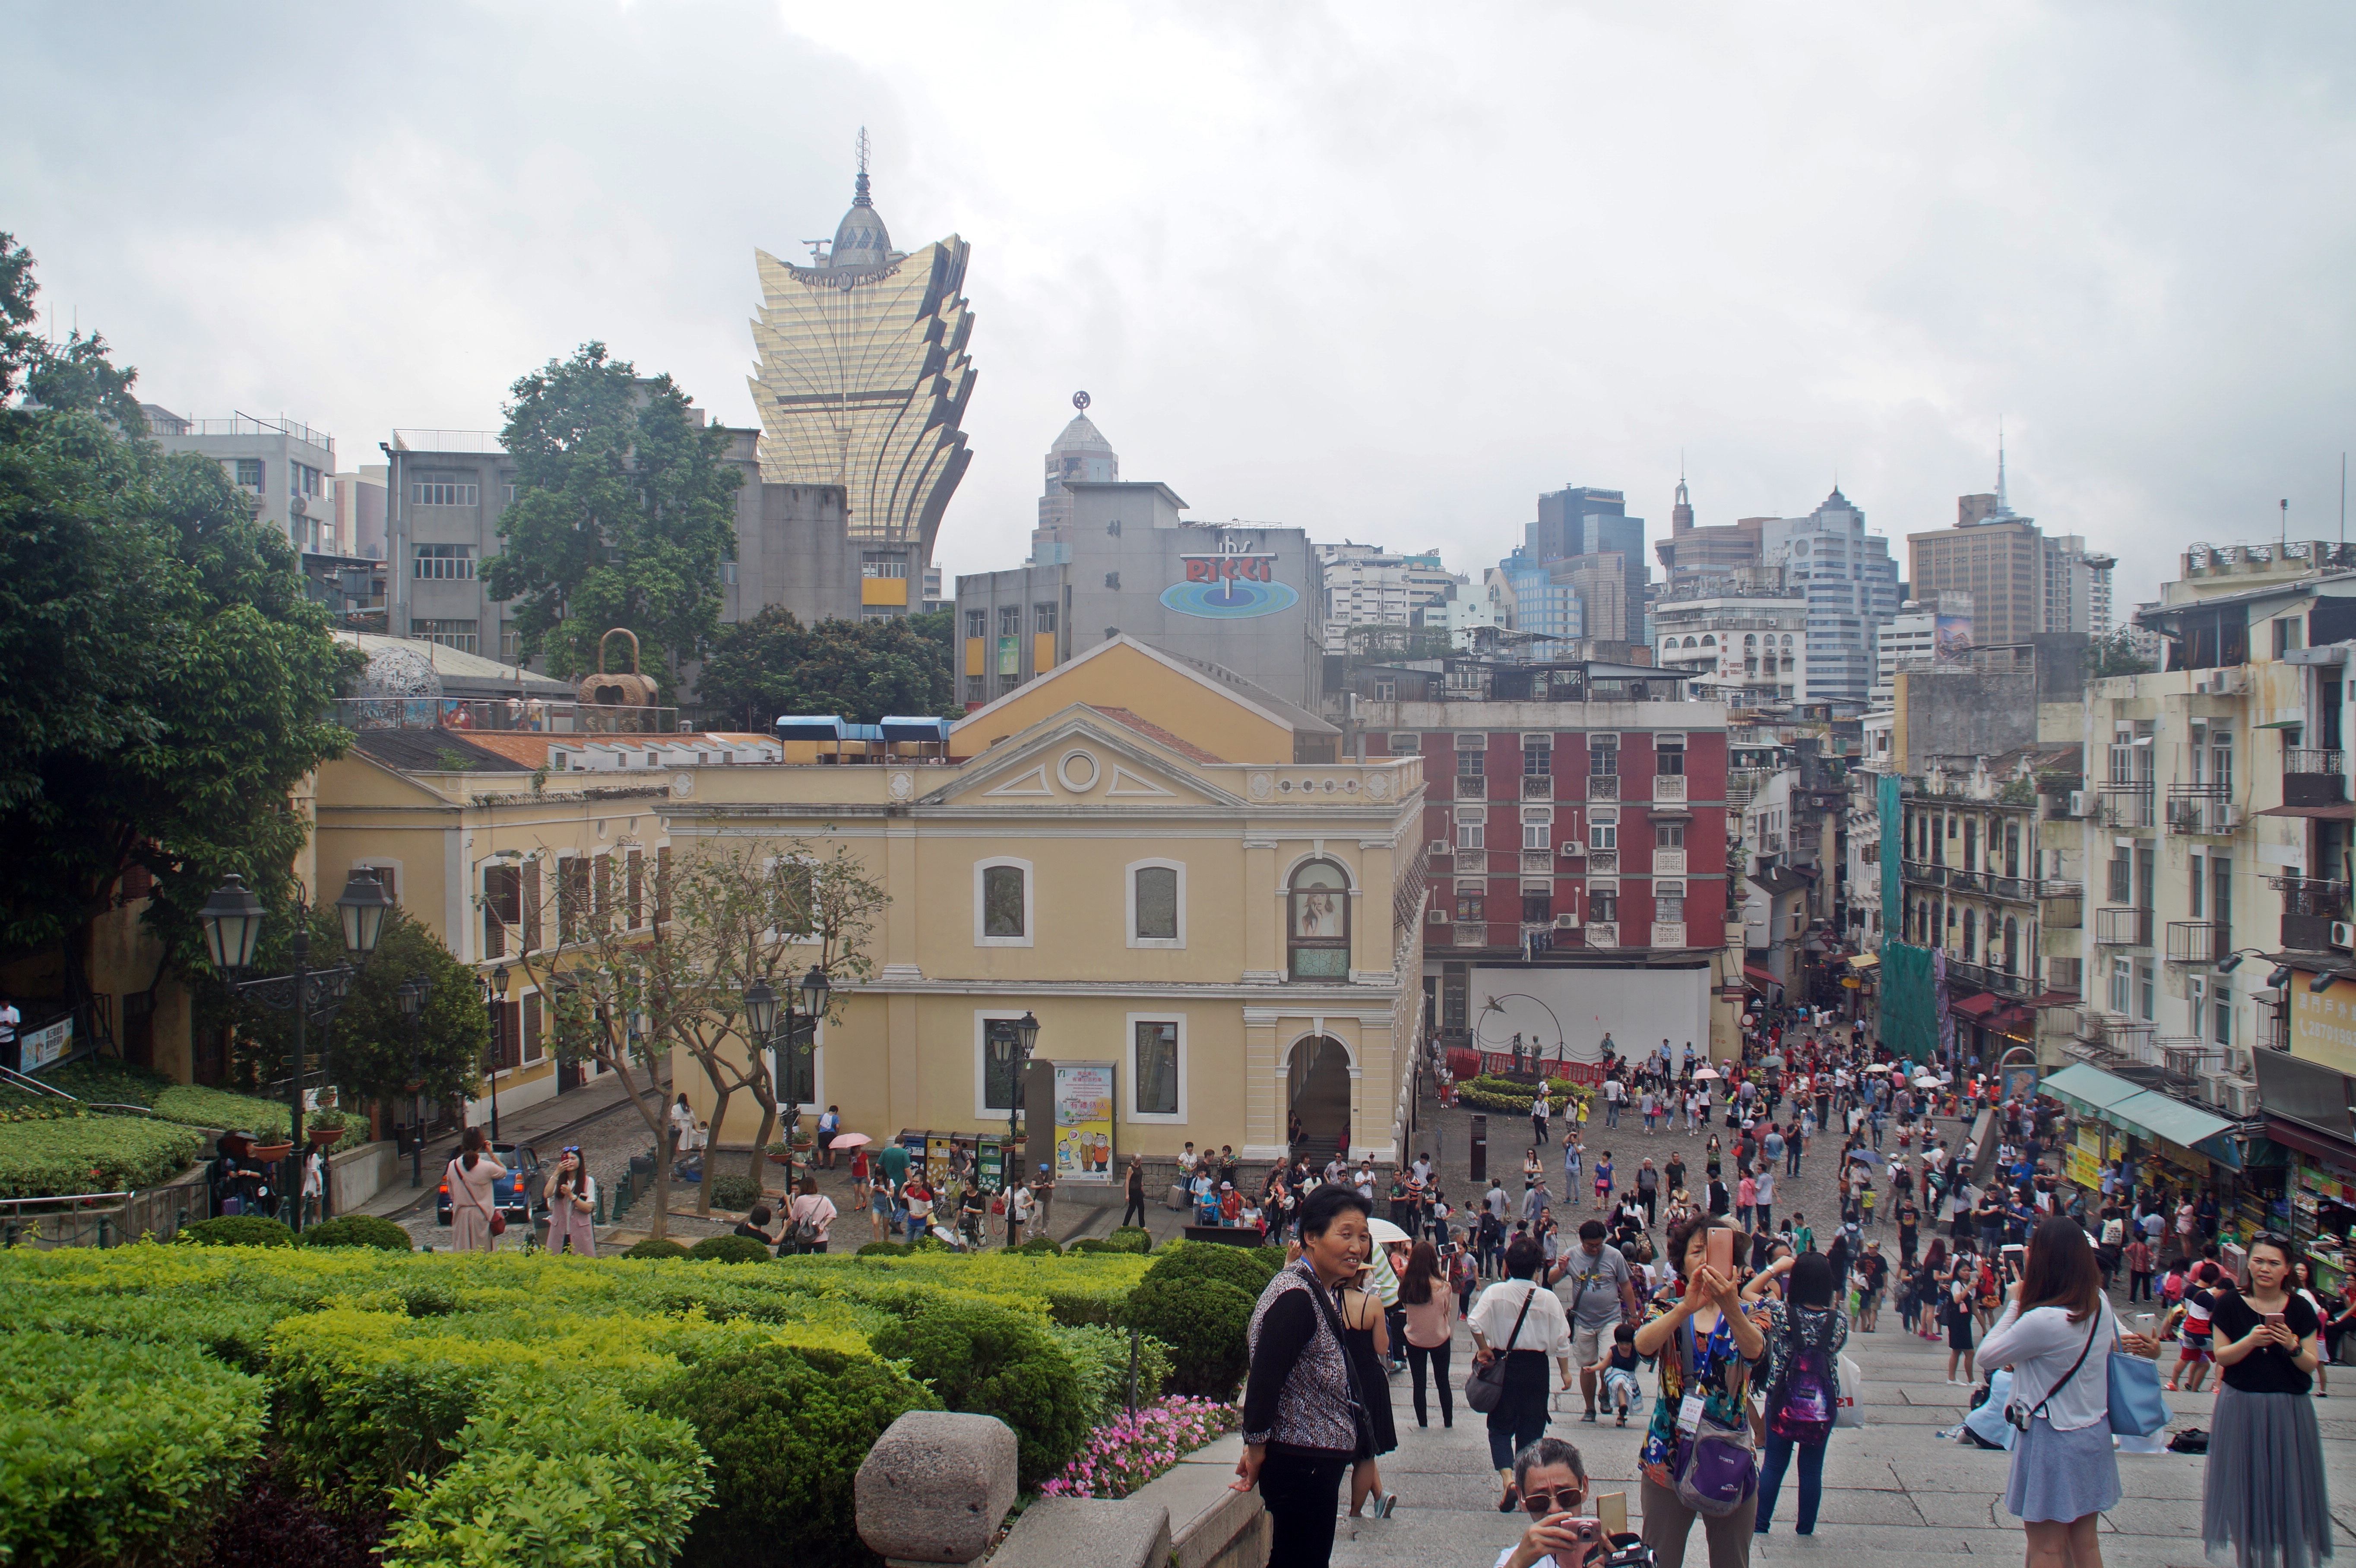 The old town in Macao